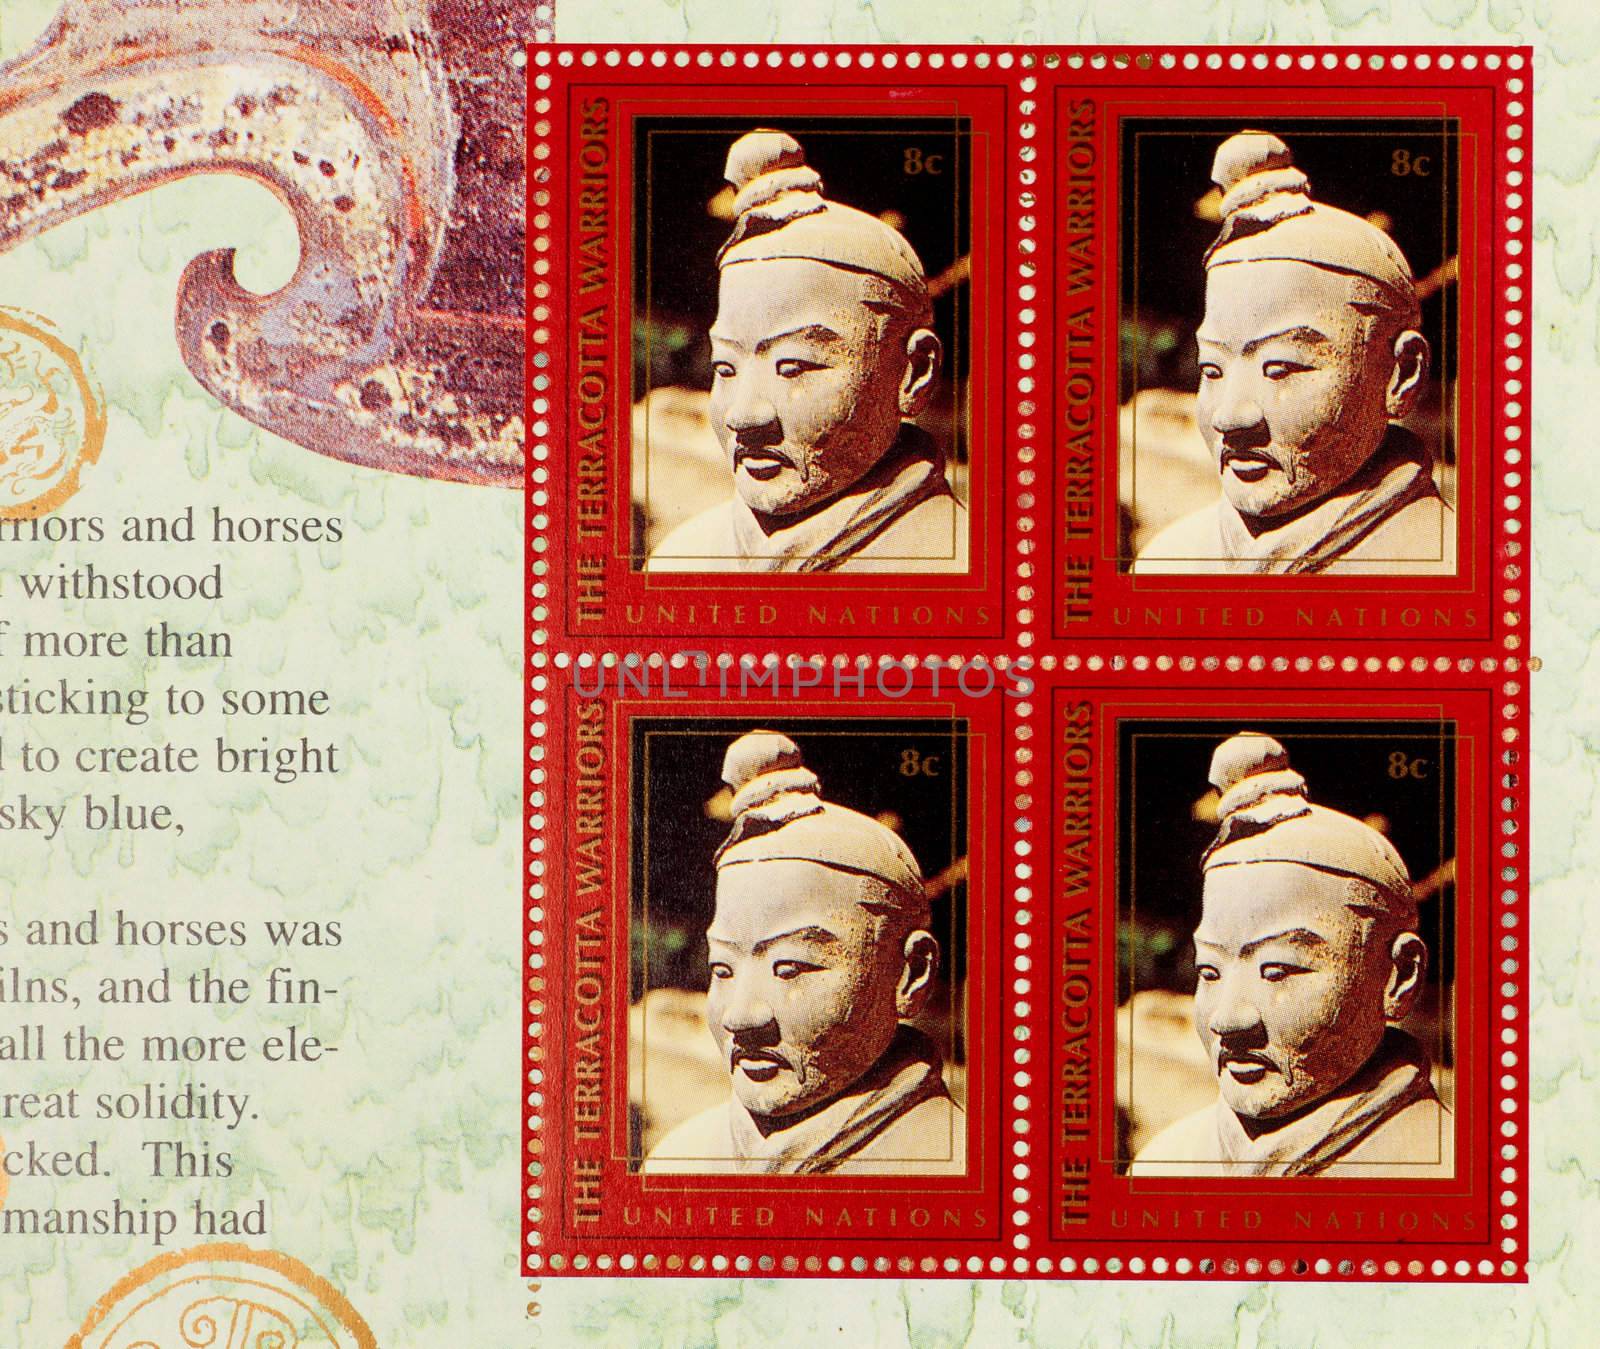 The stamps of terracotta warriors by gary718